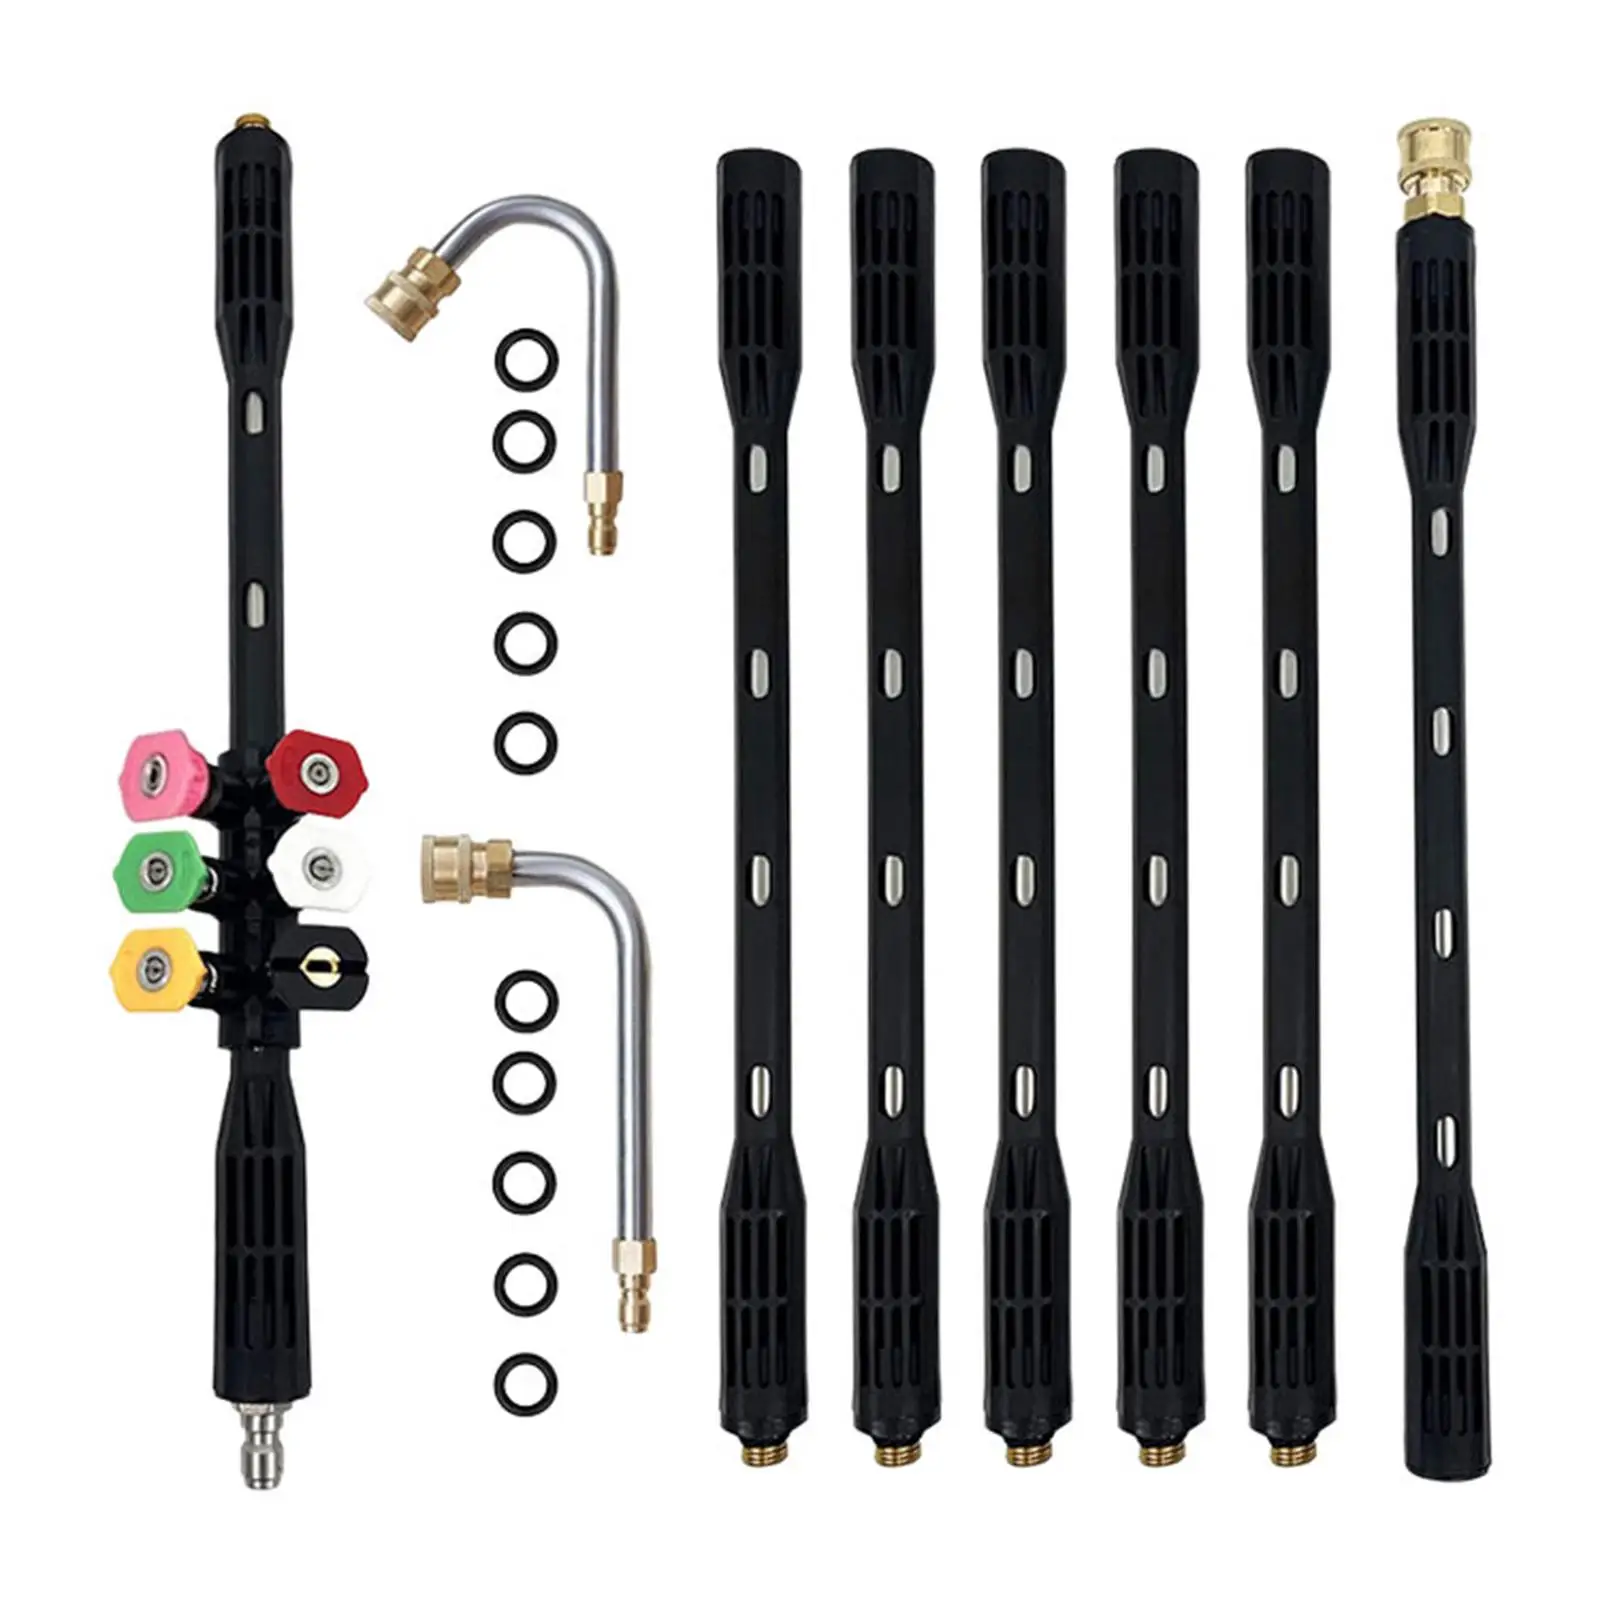 9 Pieces Power Washer Gutter Cleaning Tools Replacement Lance Pressure Washer Extension Rod for Water Broom Watering Flowers Car